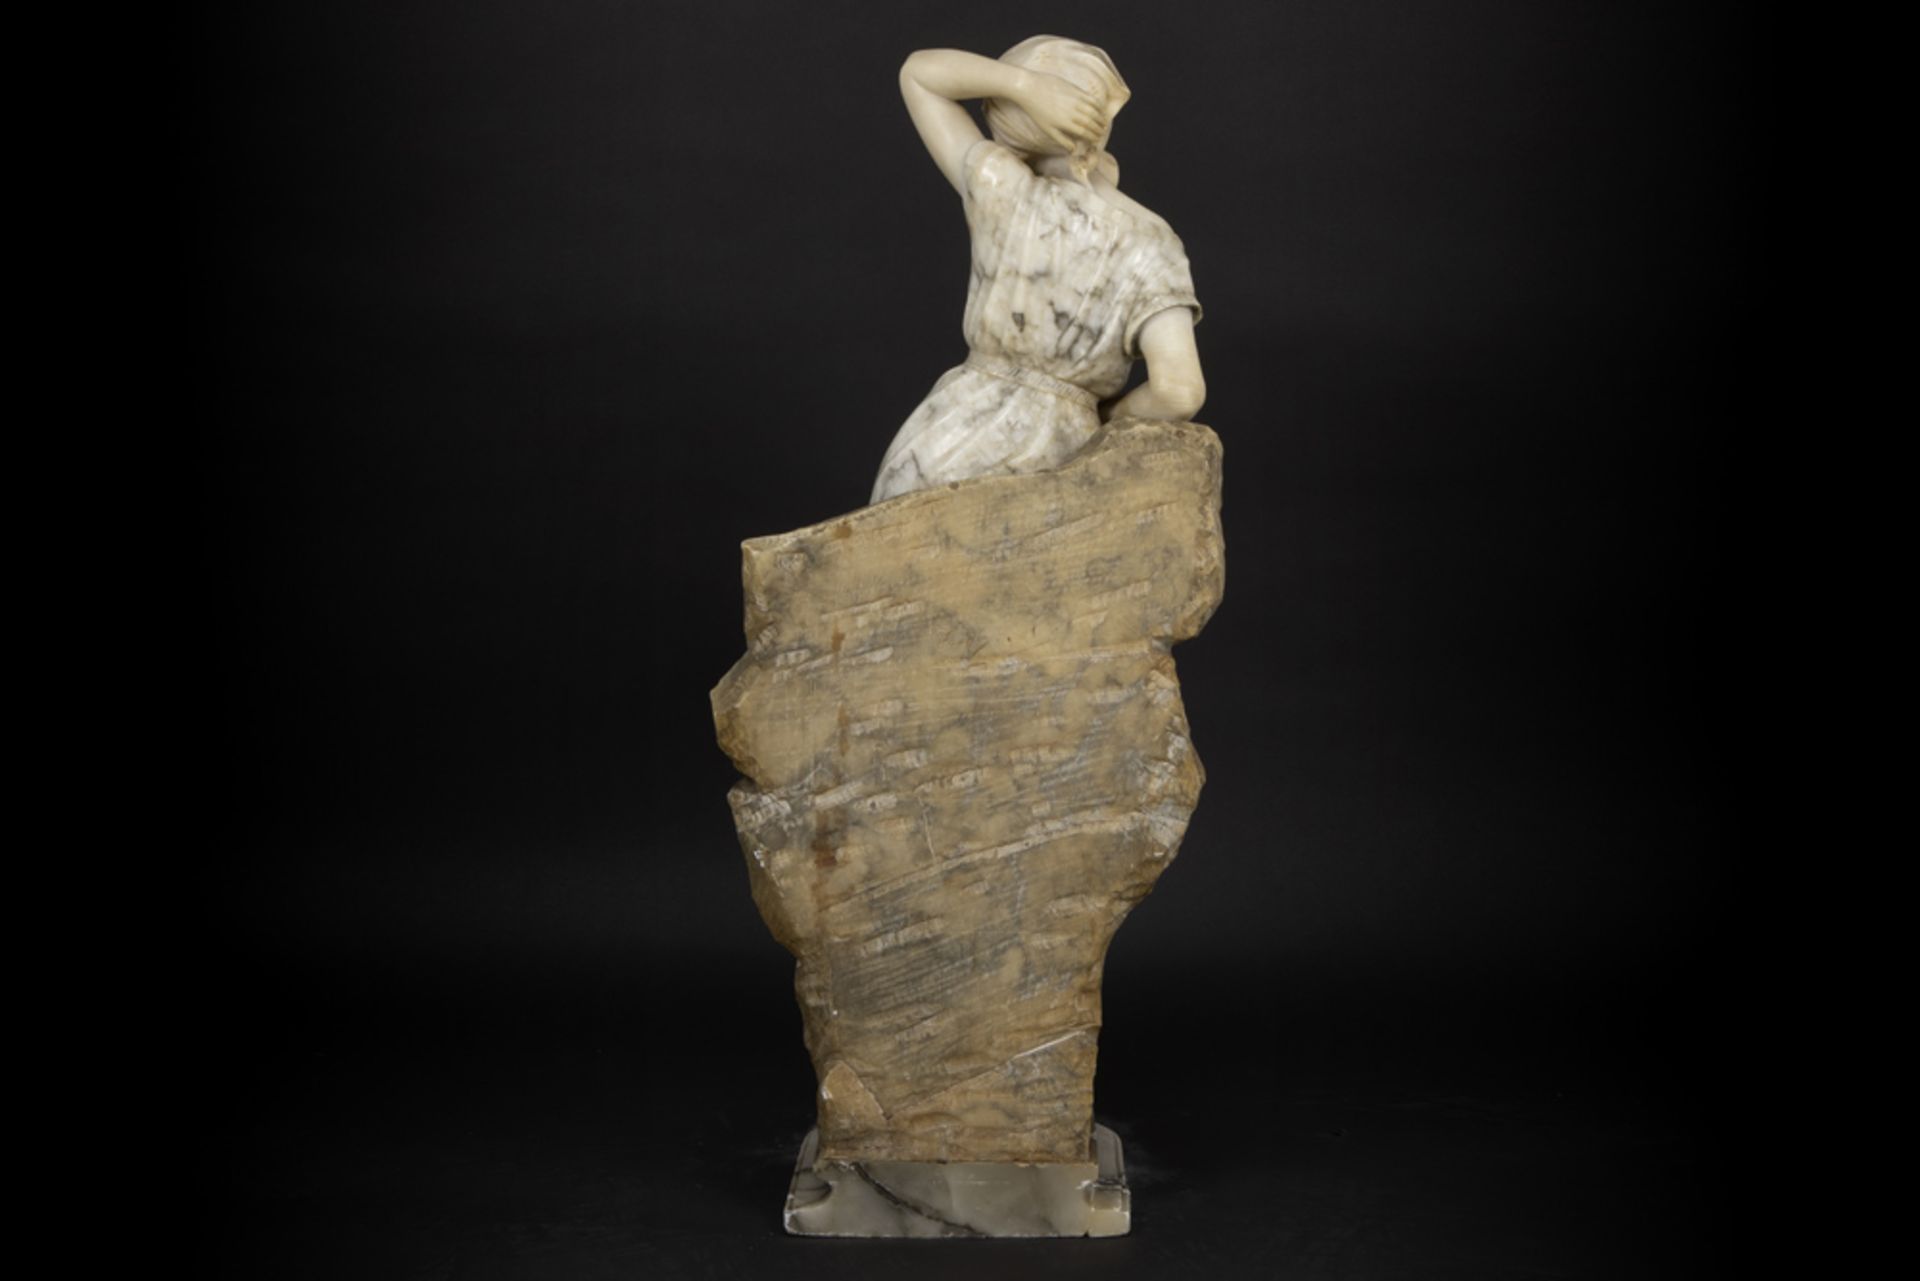 19th Cent. Italian sculpture in marble and alabaster - signed Trafely & Sardelli || TRAFELY & - Image 4 of 5